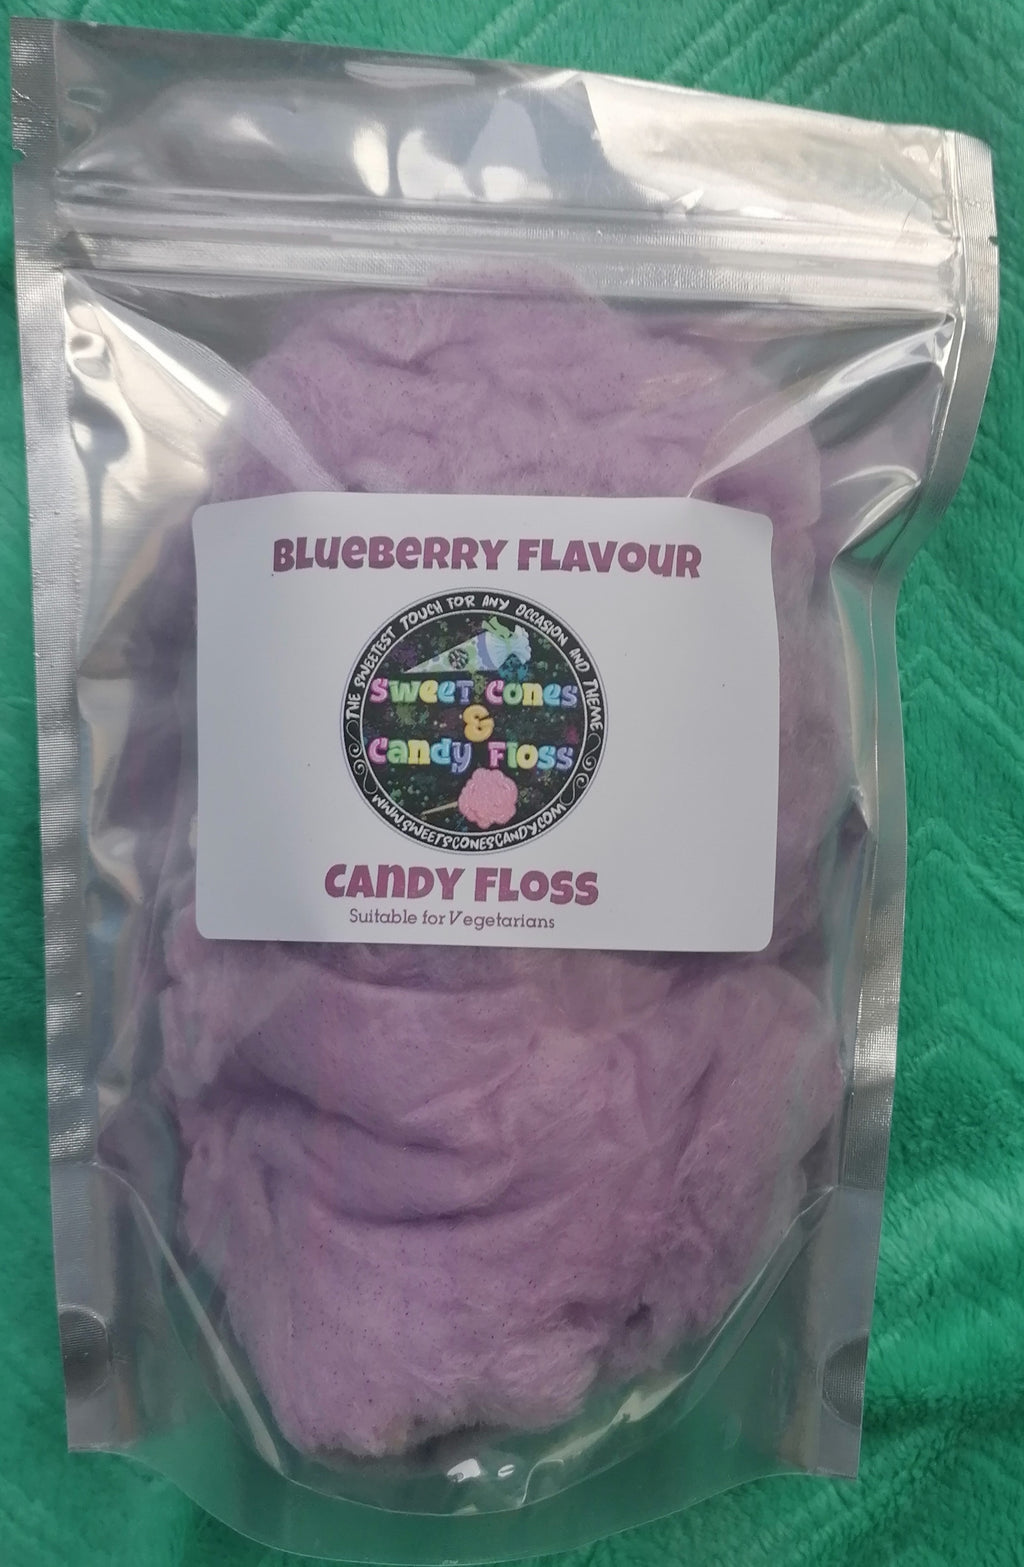 Blueberry flavour Candy Floss